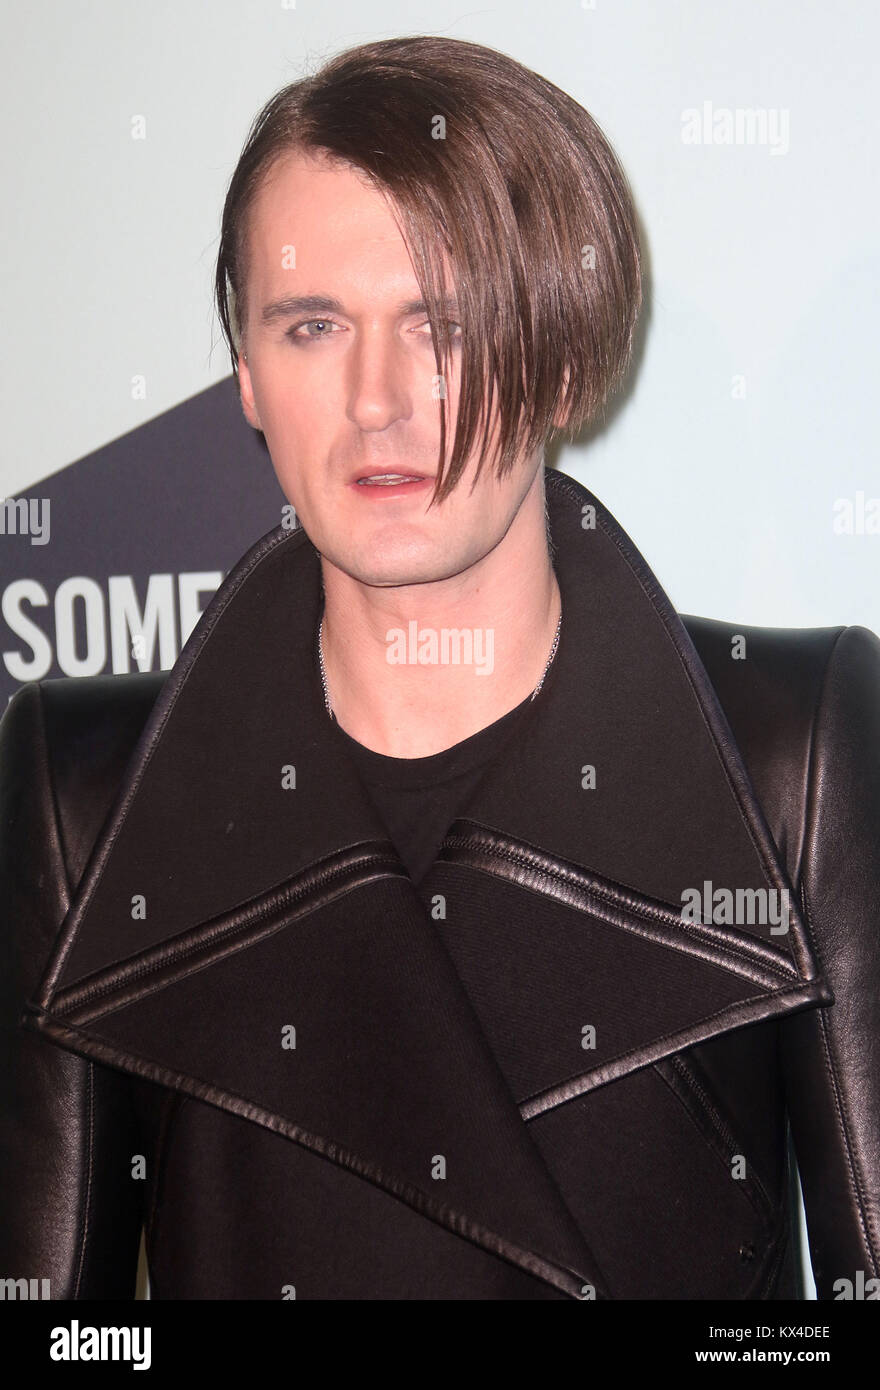 Nov 14, 2017 - Gareth Pugh attending Skate At Somerset House With Fortnum & Mason VIP Launch, Somerset House in London, England, UK Stock Photo